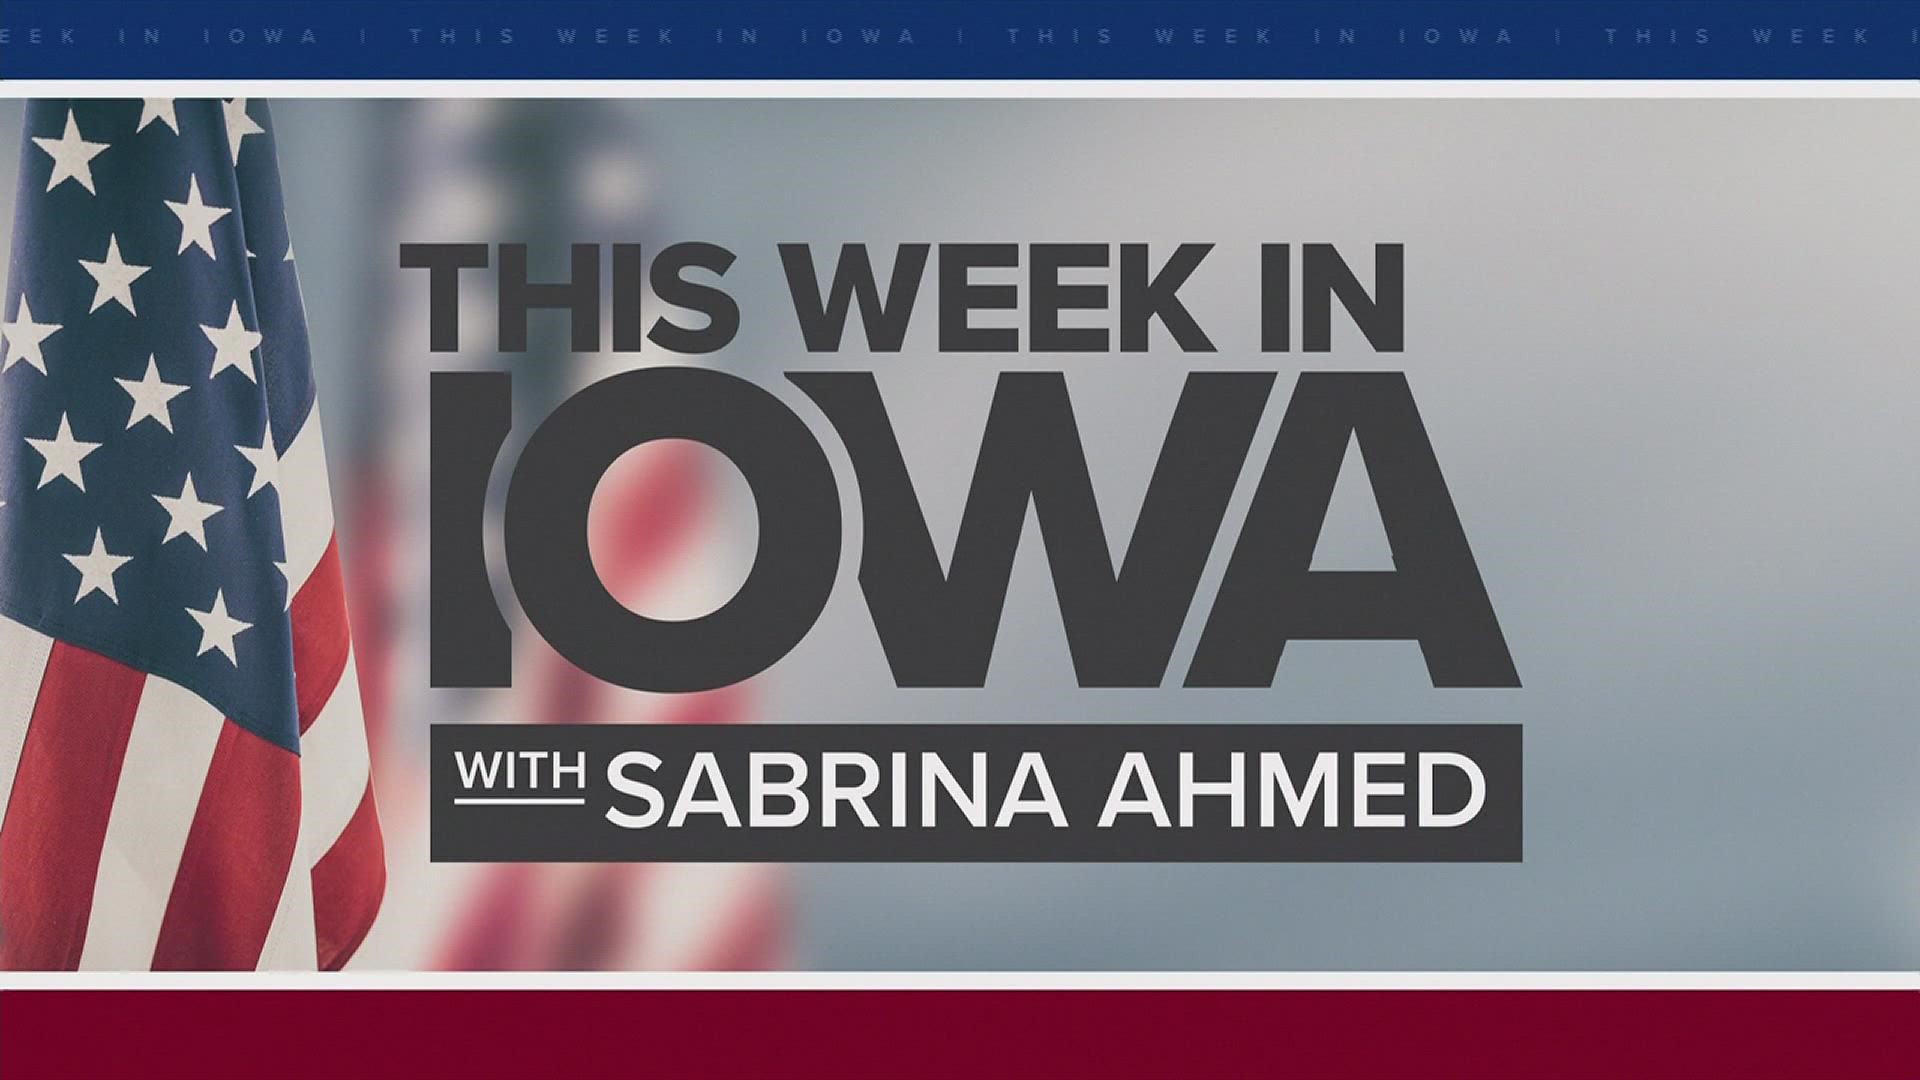 Des Moines City Council elections are Nov. 2, 2021. This week, Sabrina Ahmed sits down with Ward 3 candidates to break down the big issues on voters' minds.